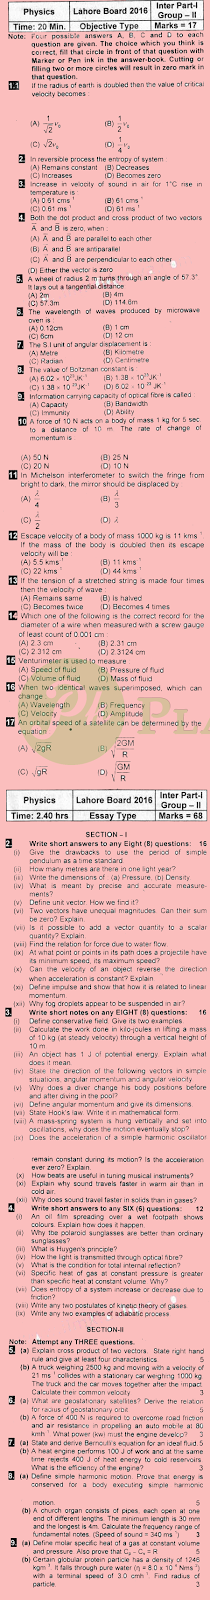 Past Papers of Physics Inter Part 1 Lahore Board 2016